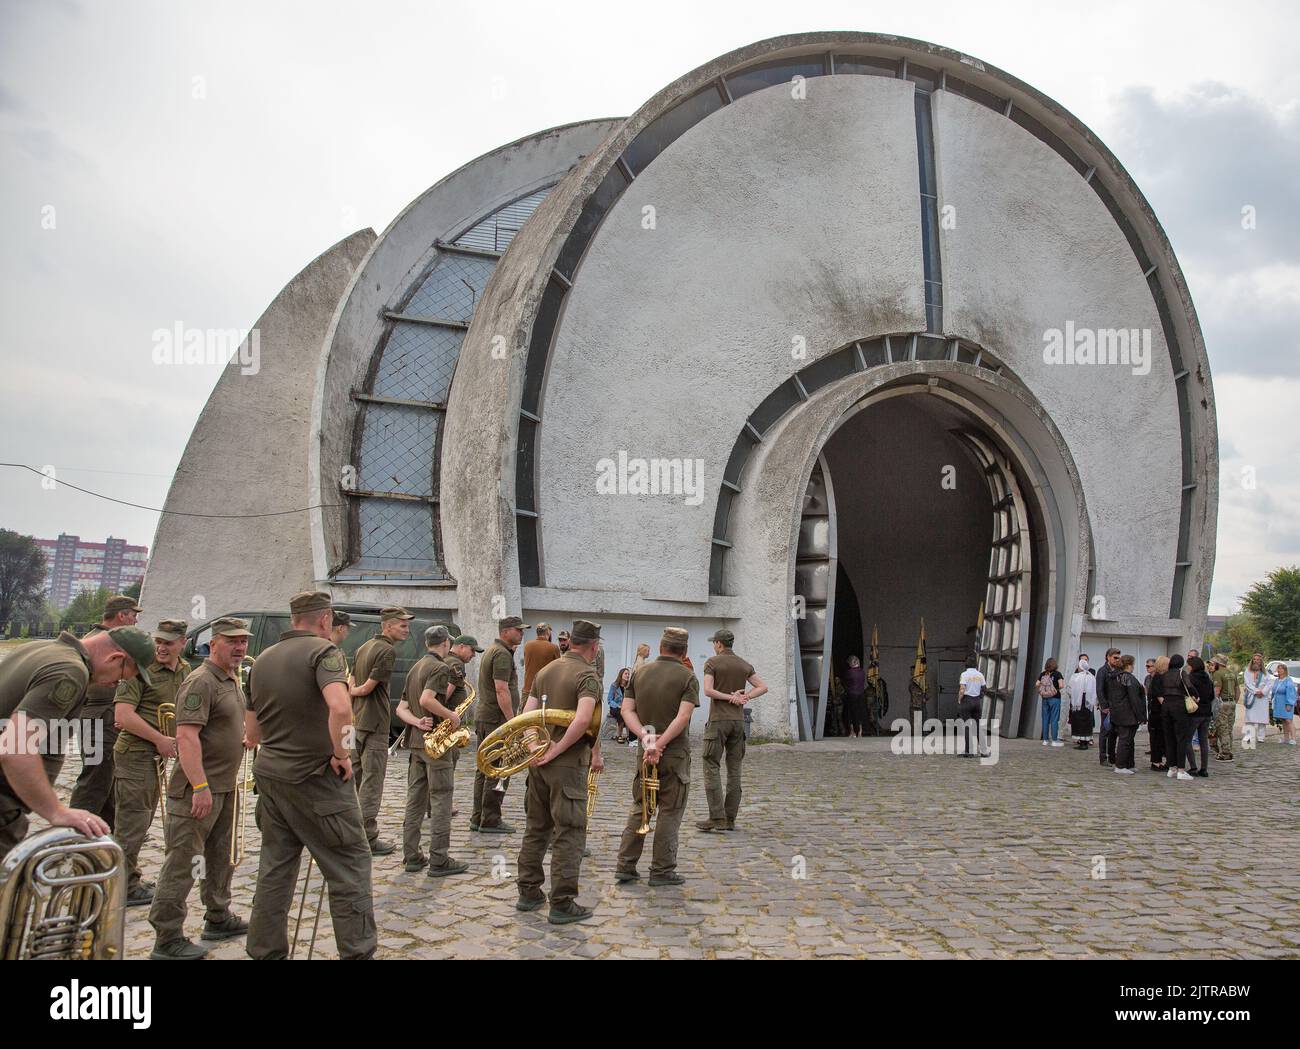 Kyiv, Ukraine on September 01, 2022: Solemn funeral of the Ukrainian soldier of the Azov regiment who died in April while defending Mariupol from the Russian invasion. Crematorium at the Baikove cemetery. Only recently the remains of a soldier were handed over to his parents. Stock Photo